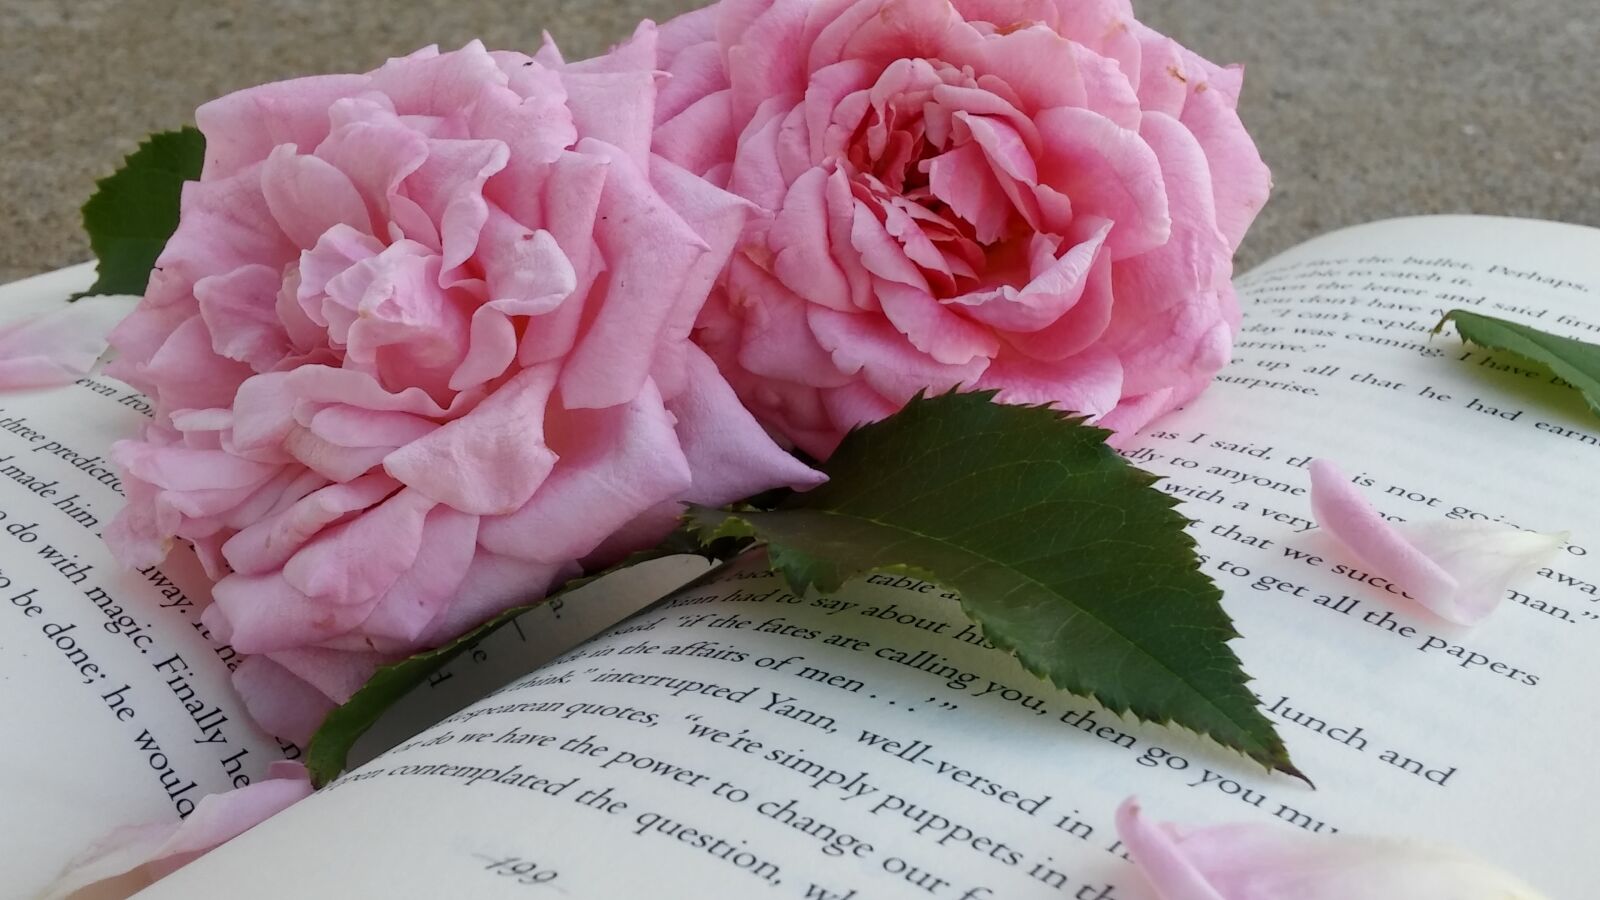 LG G STYLO sample photo. Pink flowers, roses, book photography